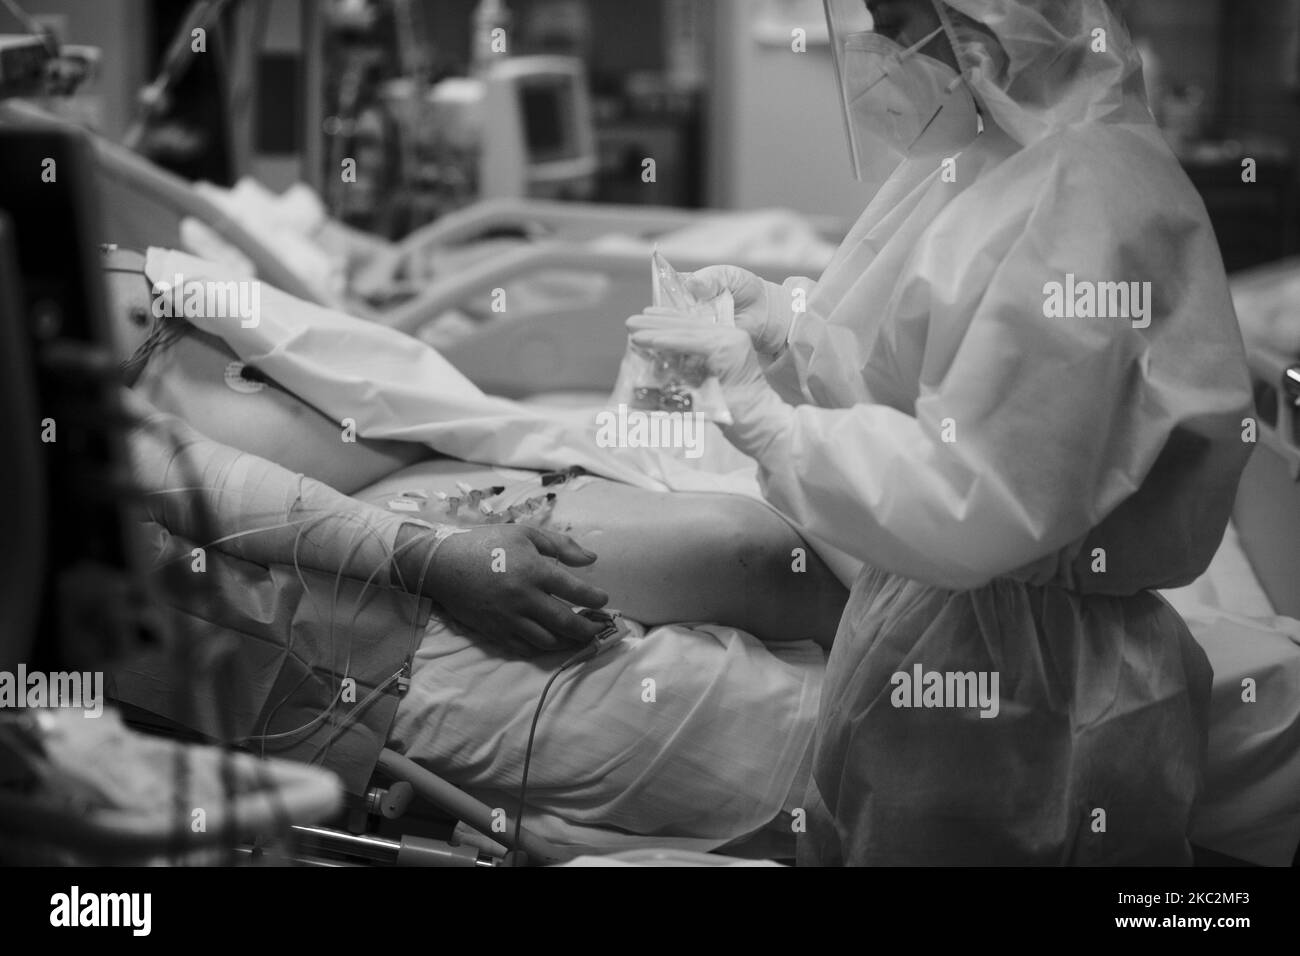 (EDITOR'S NOTE: IMAGE HAS BEEN CONVERTED TO BLACK AND WHITE) A medical worker in personal protective equipment (PPE) tends to a patient in the COVID level-3, Intensive Care Unit (ICU) for novel coronavirus, COVID-19 cases, at the Casal Palocco hospital, near Rome on October 26, 2020. .According to Ministry of Health there has been 21,273 infections from Covid-19 in the last 24 hours out of 161,880 tampons carried out. 128 deaths and 80 additional patients admitted to intensive care units. (Photo by Christian Minelli/NurPhoto) Stock Photo